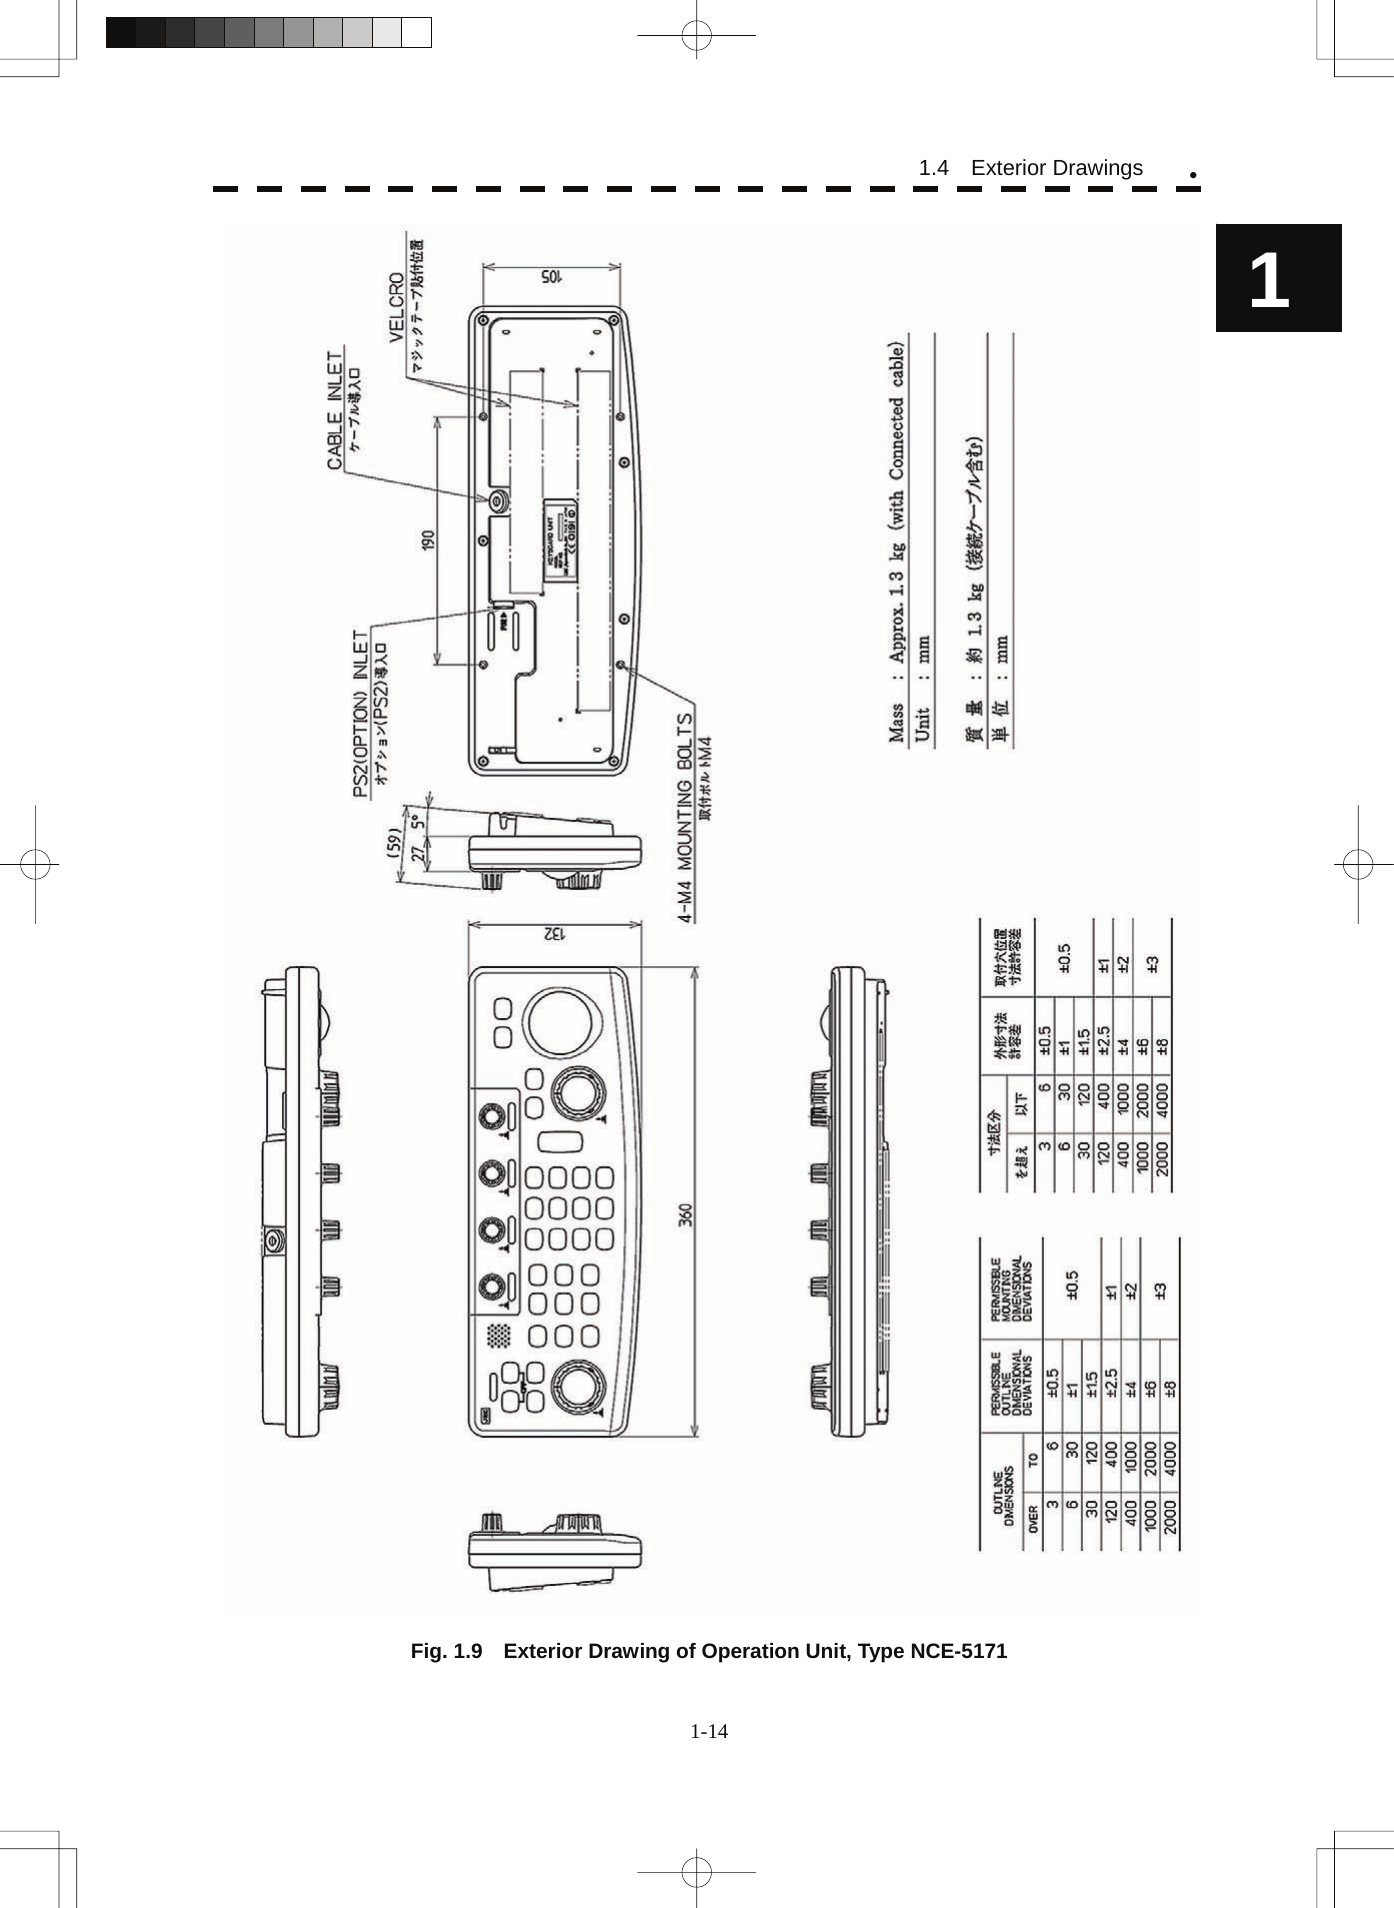  1.4  Exterior Drawings y1  Fig. 1.9    Exterior Drawing of Operation Unit, Type NCE-5171 1-14 